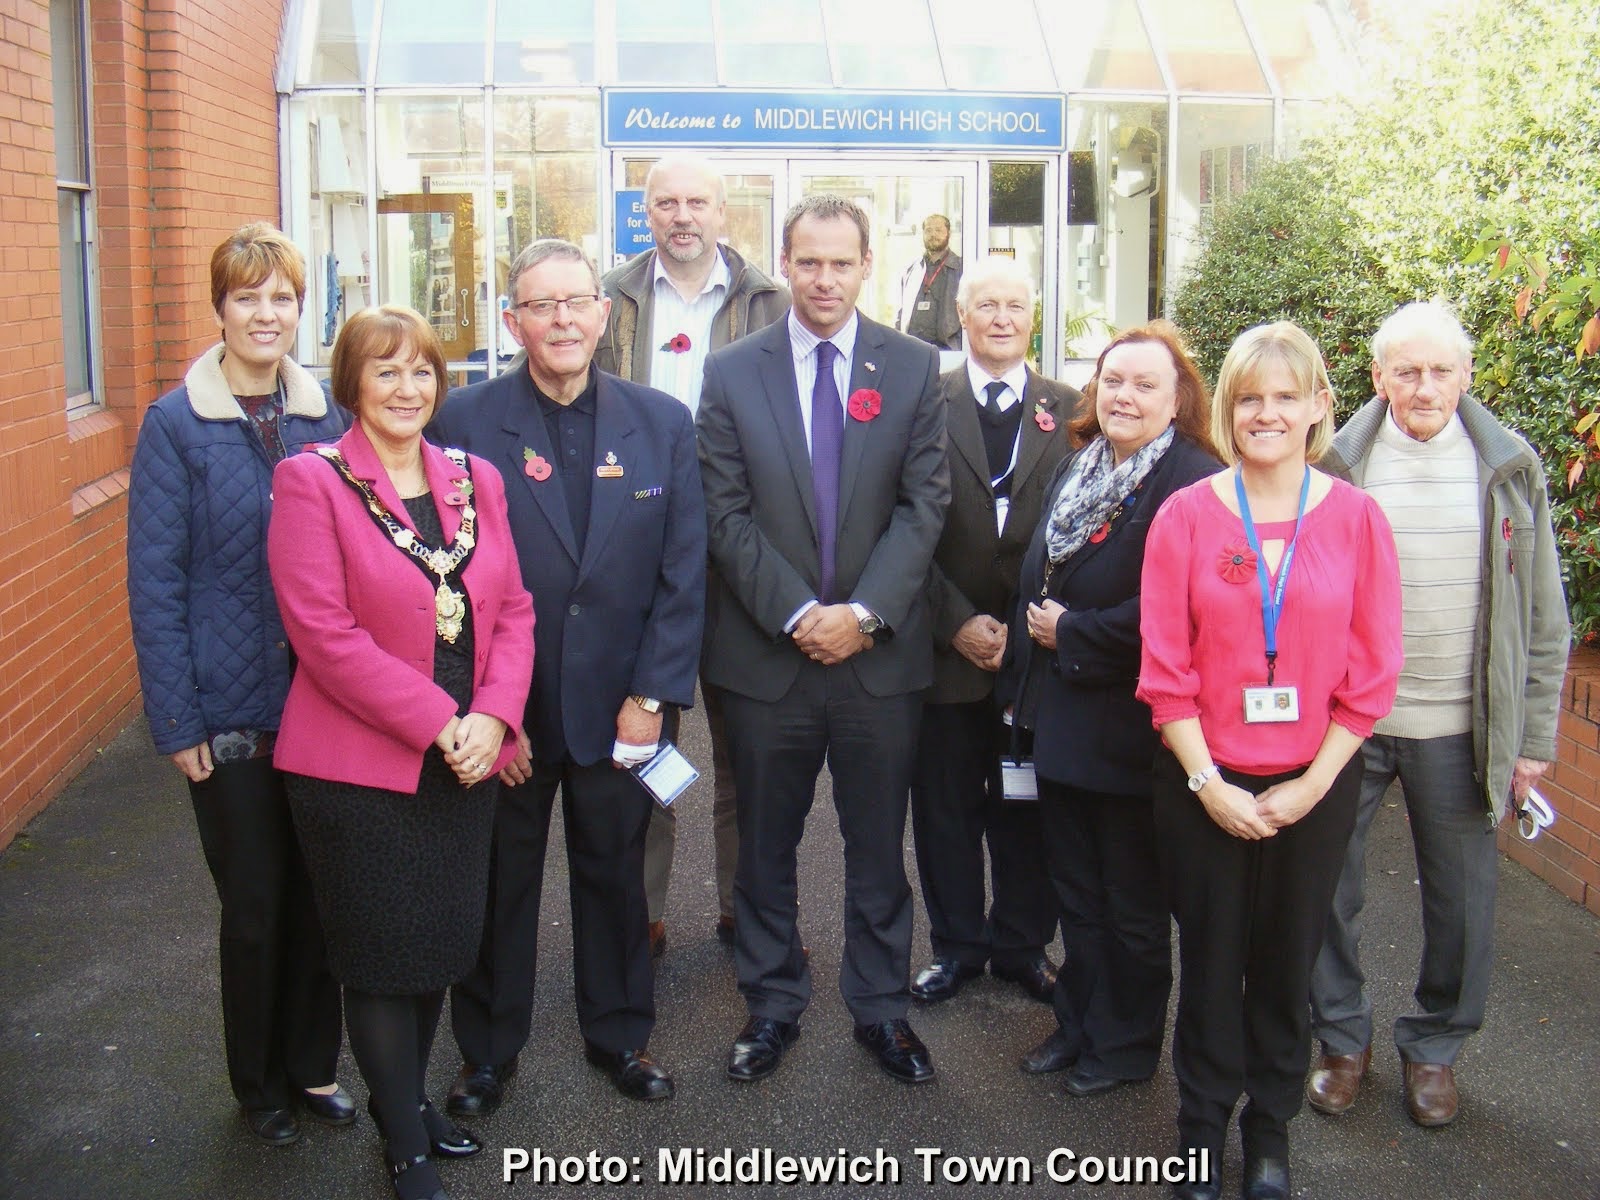 AN INTRODUCTION TO THE PROJECT BY THE MAYOR OF MIDDLEWICH